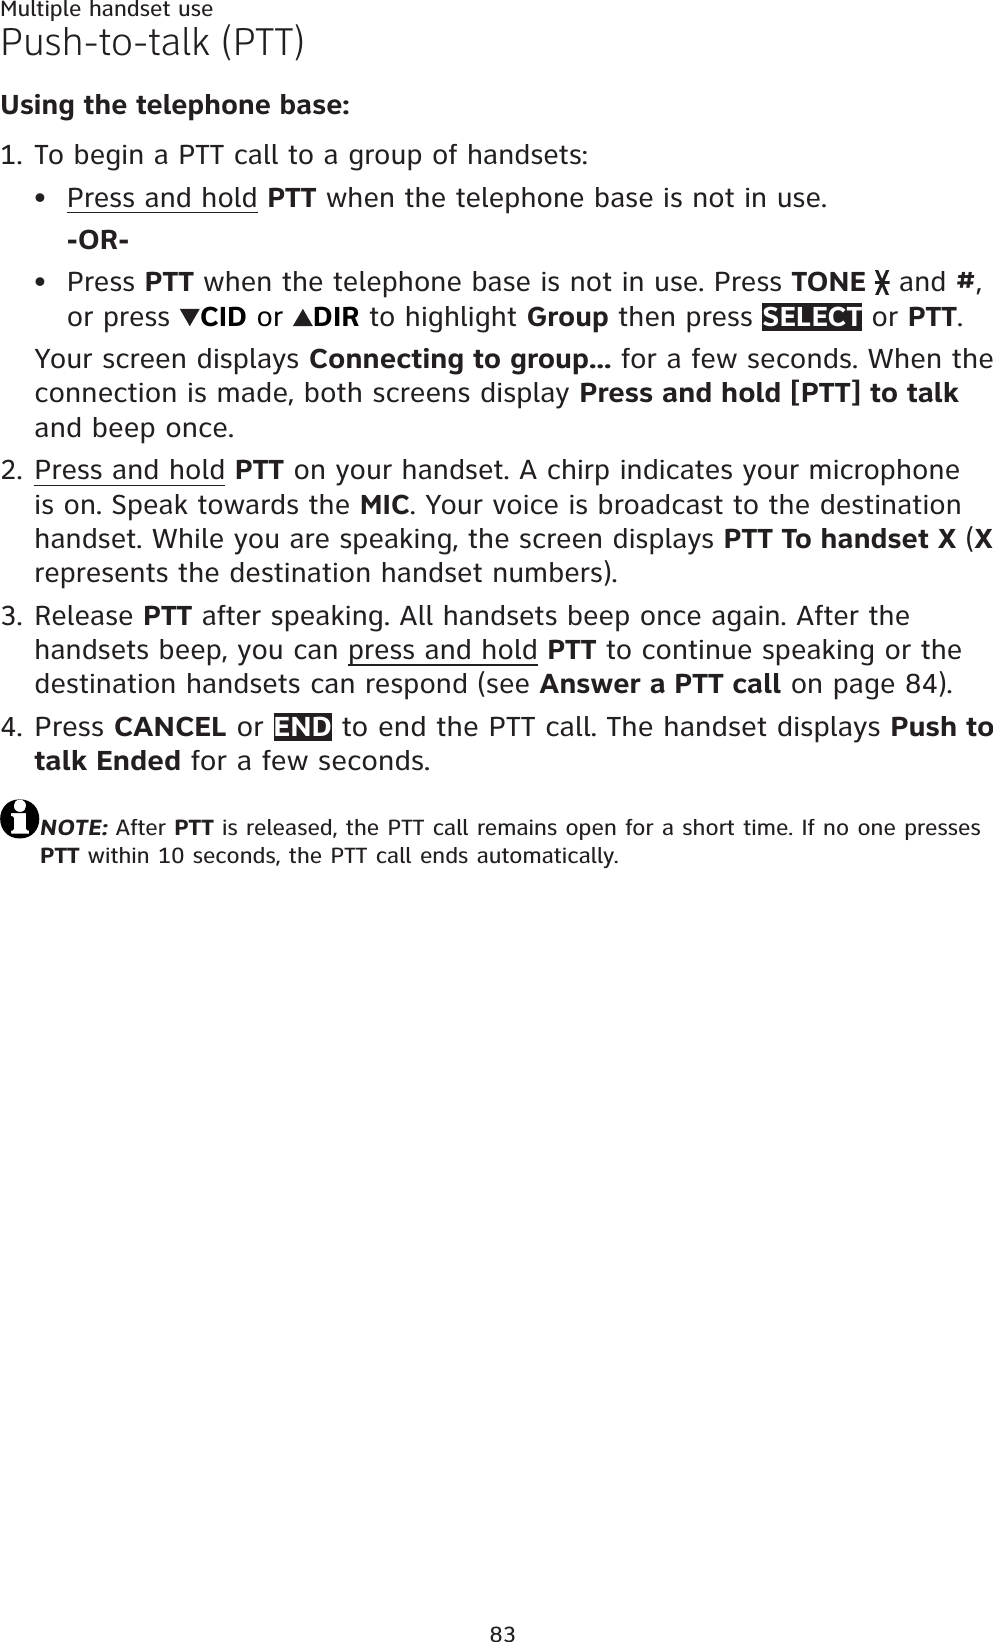 83Multiple handset usePush-to-talk (PTT)Using the telephone base:To begin a PTT call to a group of handsets:Press and hold PTT when the telephone base is not in use.-OR-Press PTT when the telephone base is not in use. Press TONE  and #,or press  CID or  DIR to highlight Group then press SELECT or PTT.Your screen displays Connecting to group... for a few seconds. When the connection is made, both screens display Press and hold [PTT] to talkand beep once.Press and hold PTT on your handset. A chirp indicates your microphone is on. Speak towards the MIC. Your voice is broadcast to the destination handset. While you are speaking, the screen displays PTT To handset X (Xrepresents the destination handset numbers).Release PTT after speaking. All handsets beep once again. After the handsets beep, you can press and hold PTT to continue speaking or the destination handsets can respond (see Answer a PTT call on page 84).Press CANCEL or END to end the PTT call. The handset displays Push to talk Ended for a few seconds.NOTE: After PTT is released, the PTT call remains open for a short time. If no one presses PTT within 10 seconds, the PTT call ends automatically.1.••2.3.4.